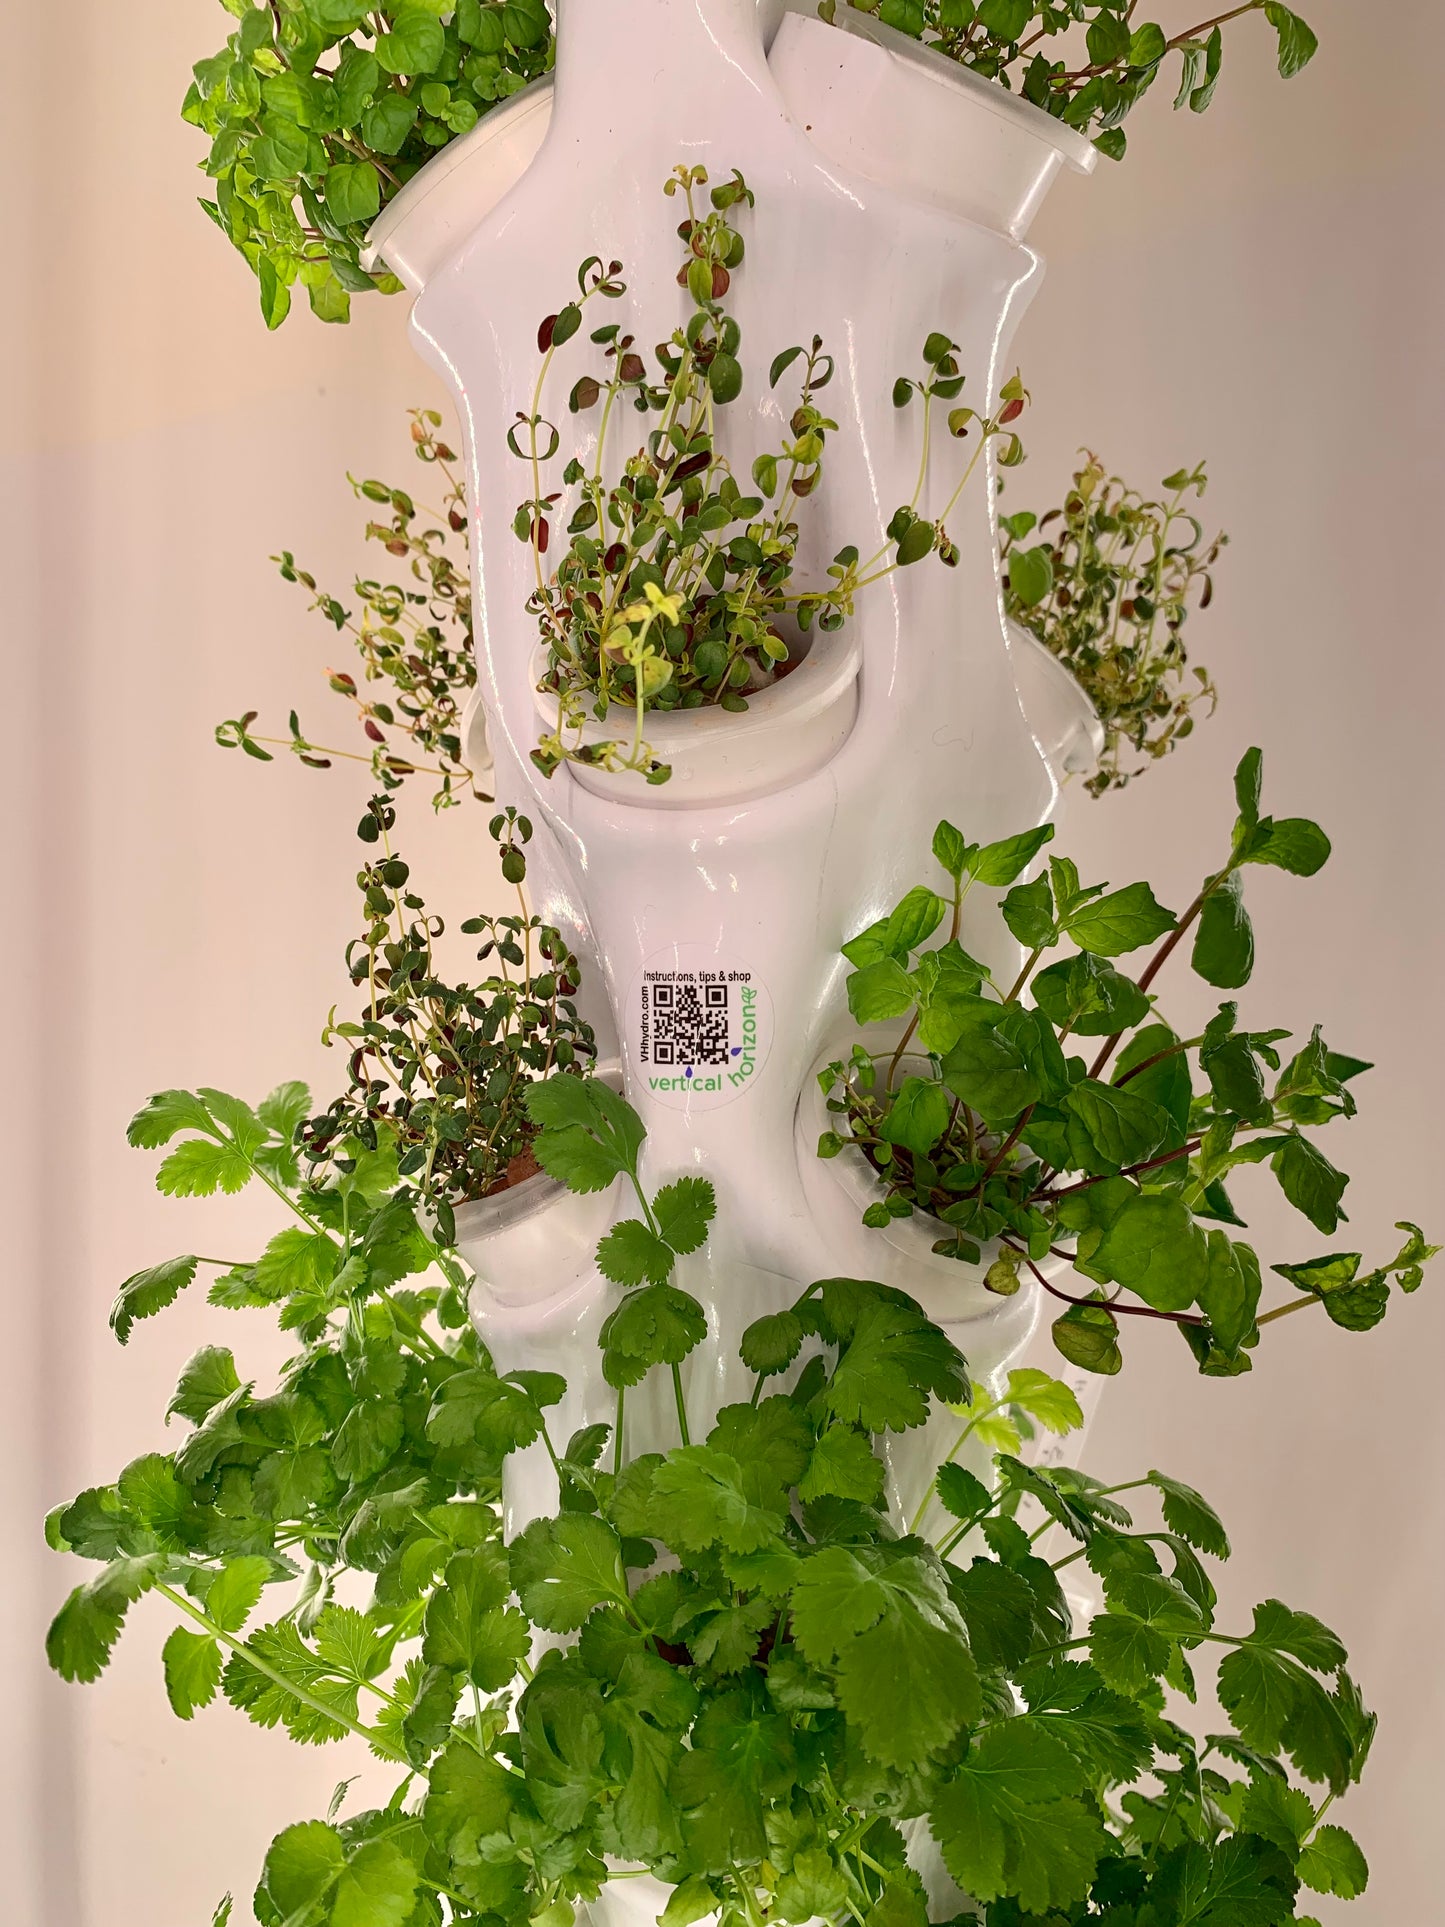 Commercial Vertical Hydroponic Tower System 42 plant capacity, optional LED Lights